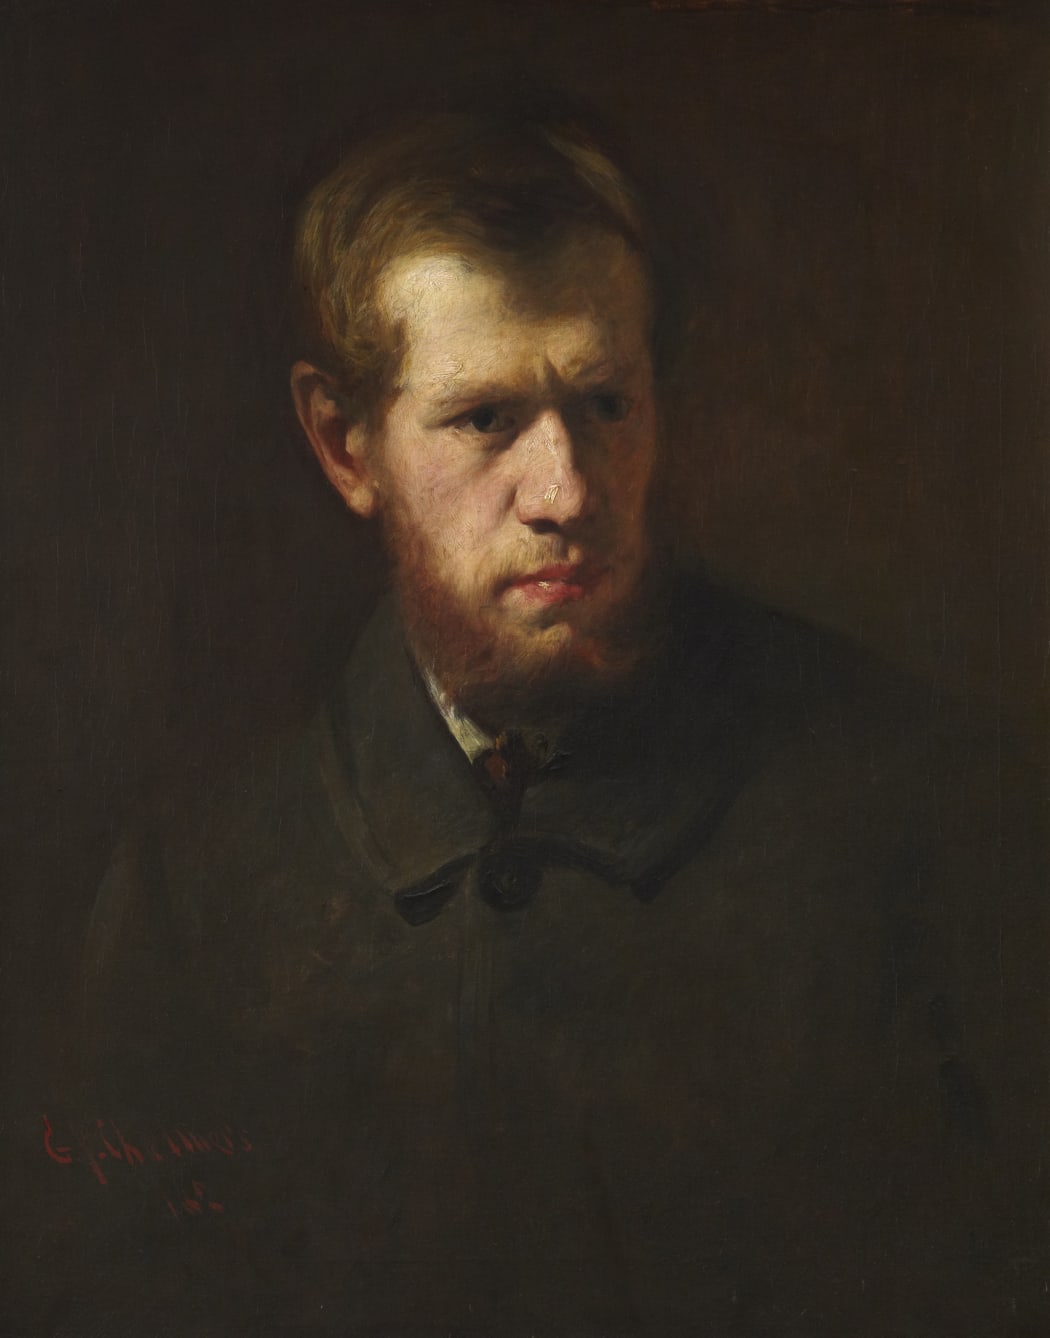    Image caption: (1993.016) John Pettie RA HRSA (1839-93), George Paul Chalmers RSA, oil on canvas (1862), RSA Collections gifted by William B Hardie, 1911